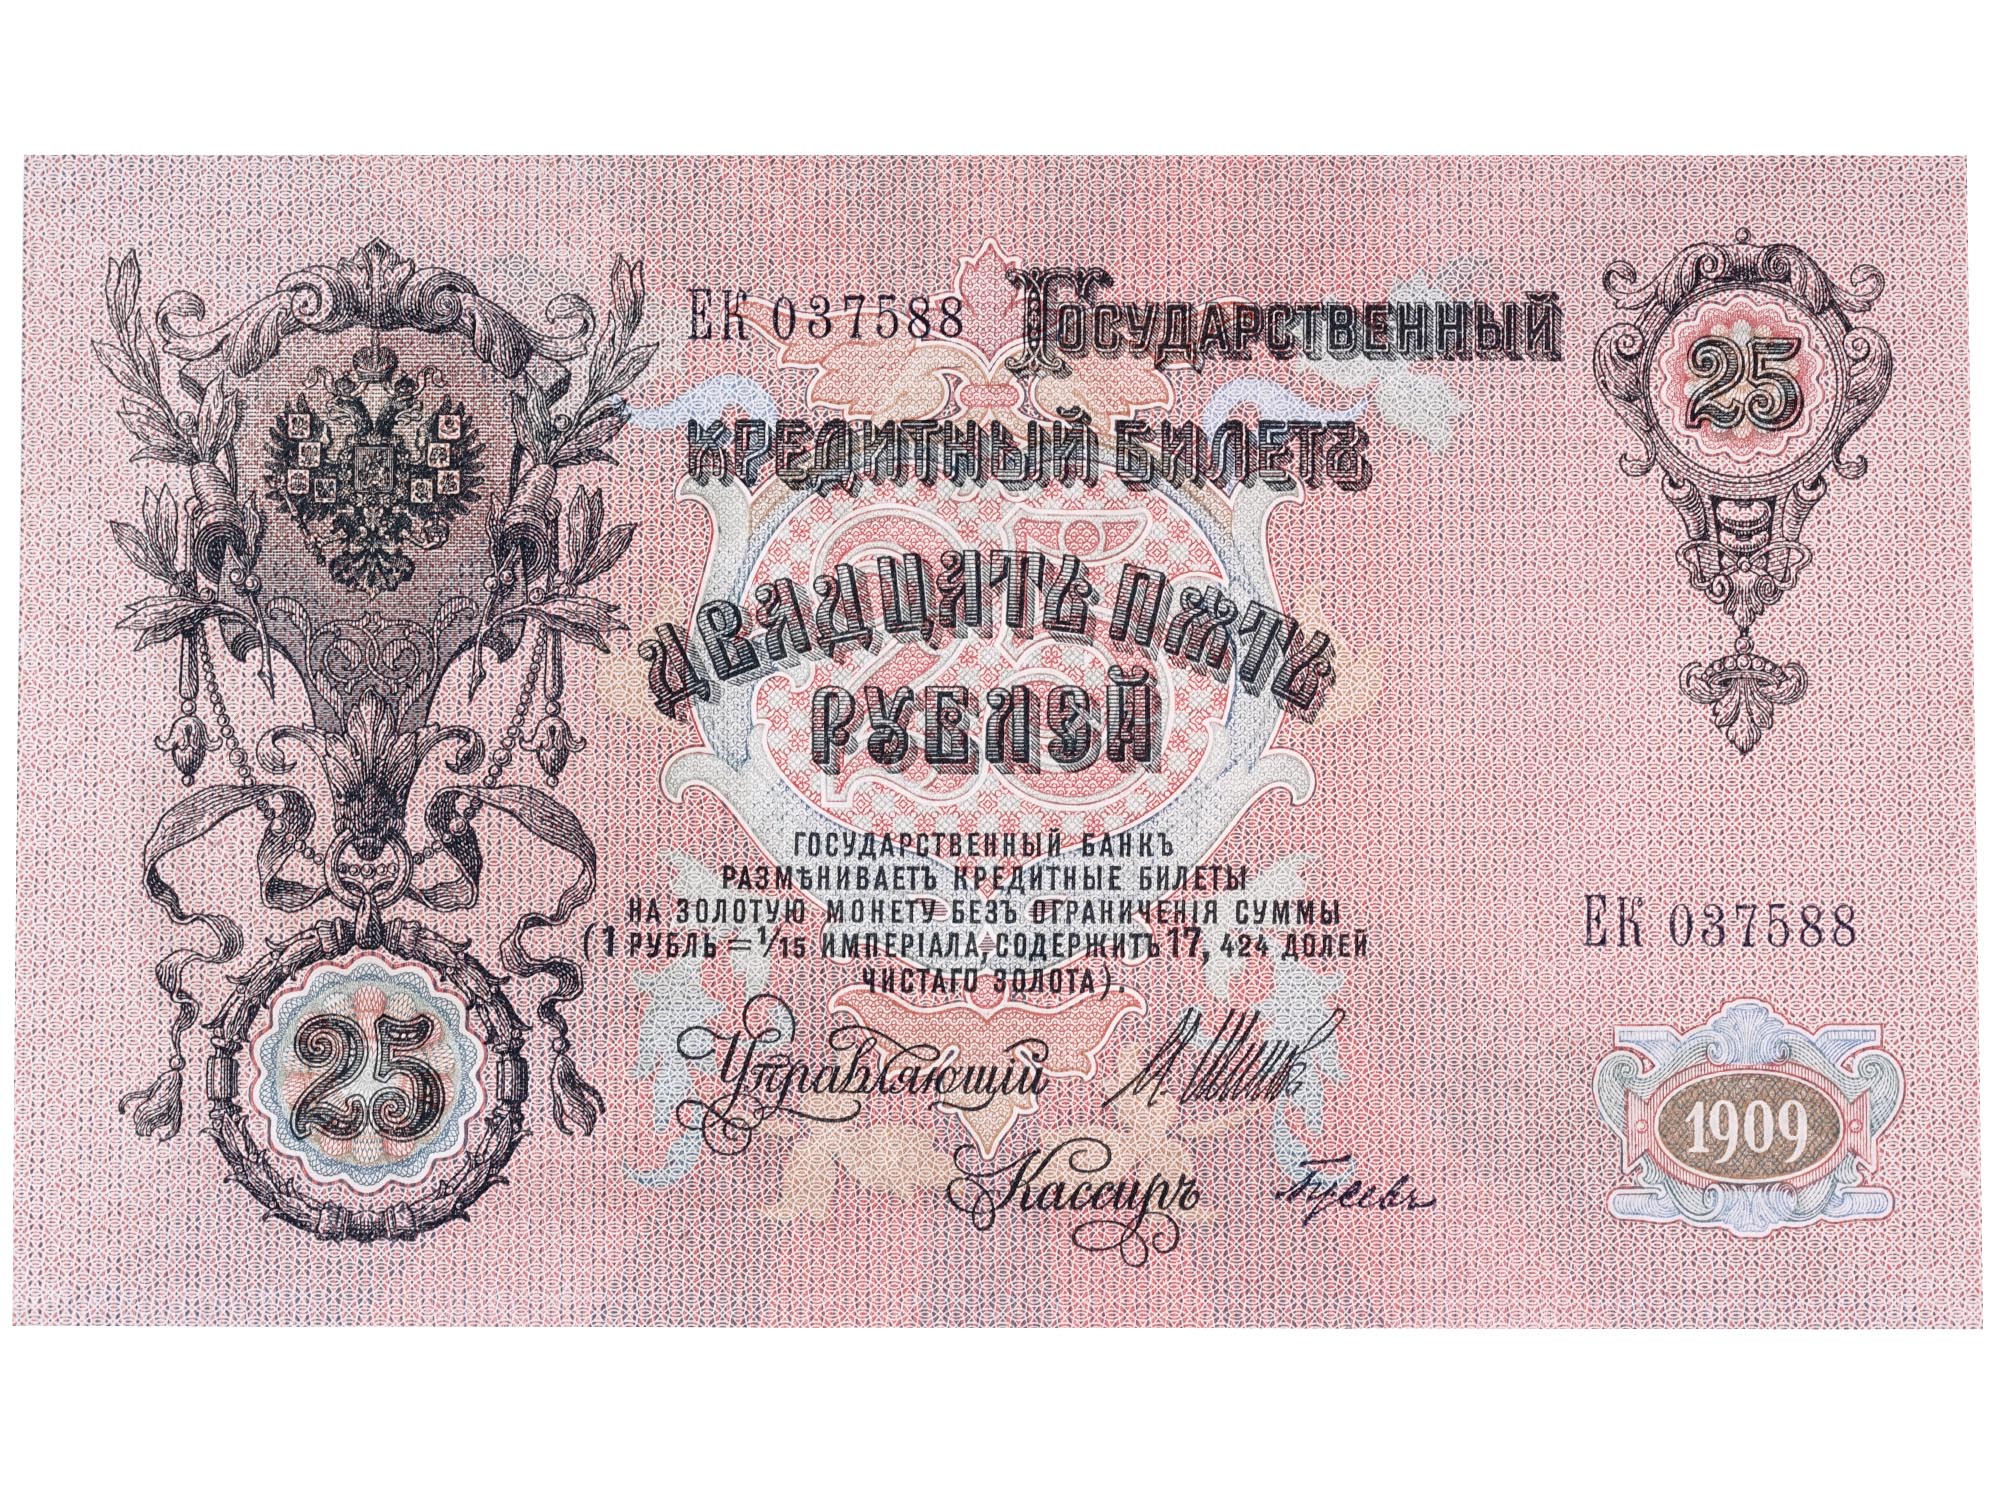 ANTIQUE AMERICAN AND RUSSIAN PAPER MONEY BANKNOTES PIC-3